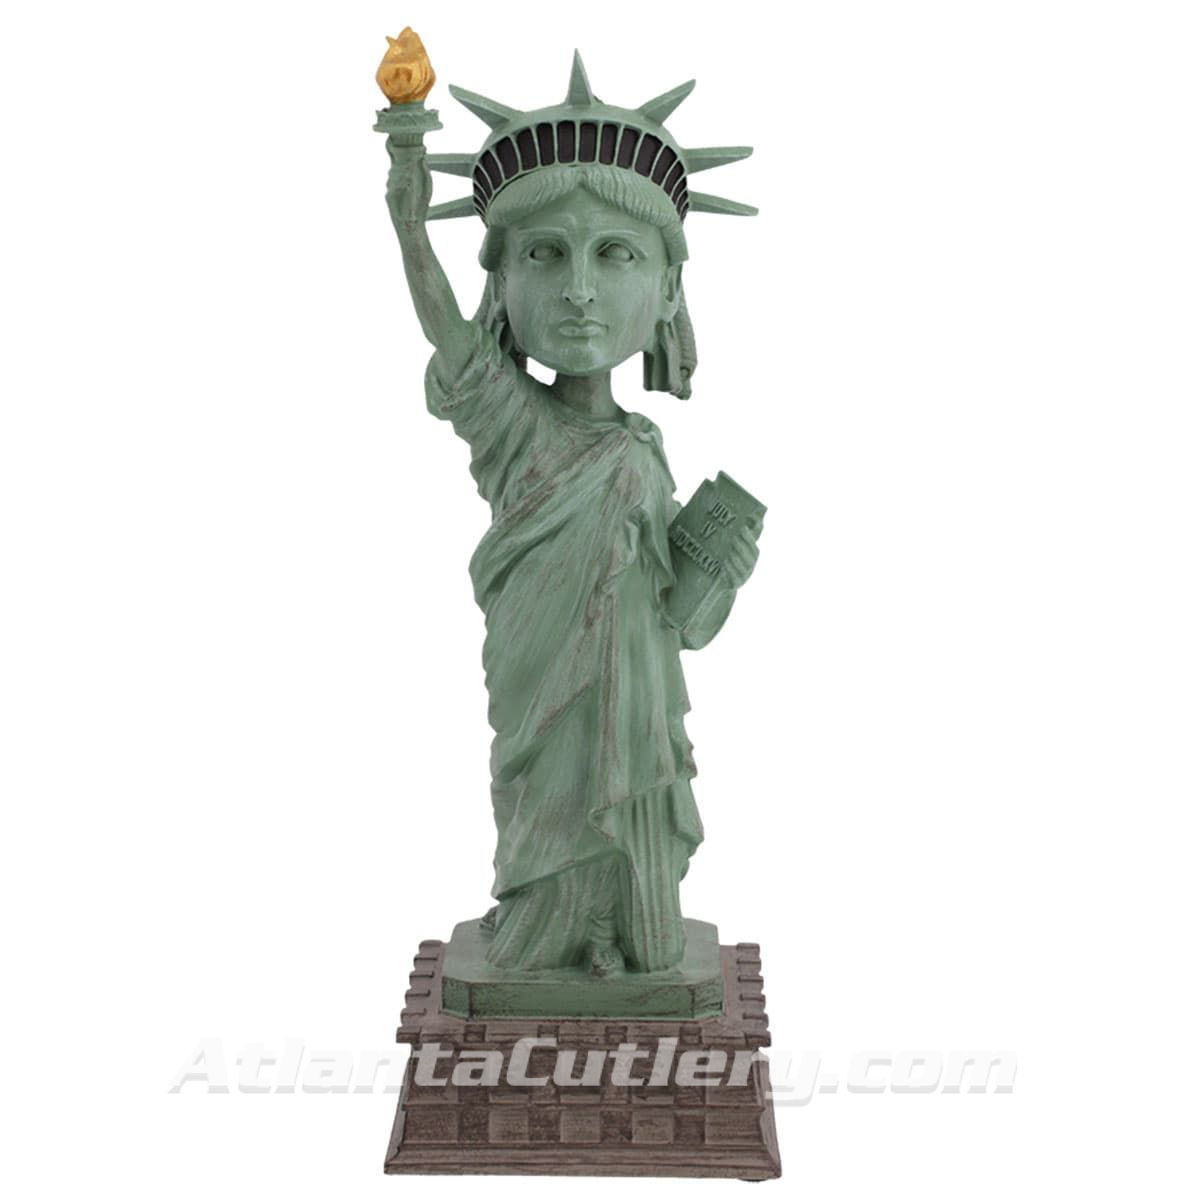 Statue of Liberty handpainted resin bobblehead includes a collector box with important facts about her 